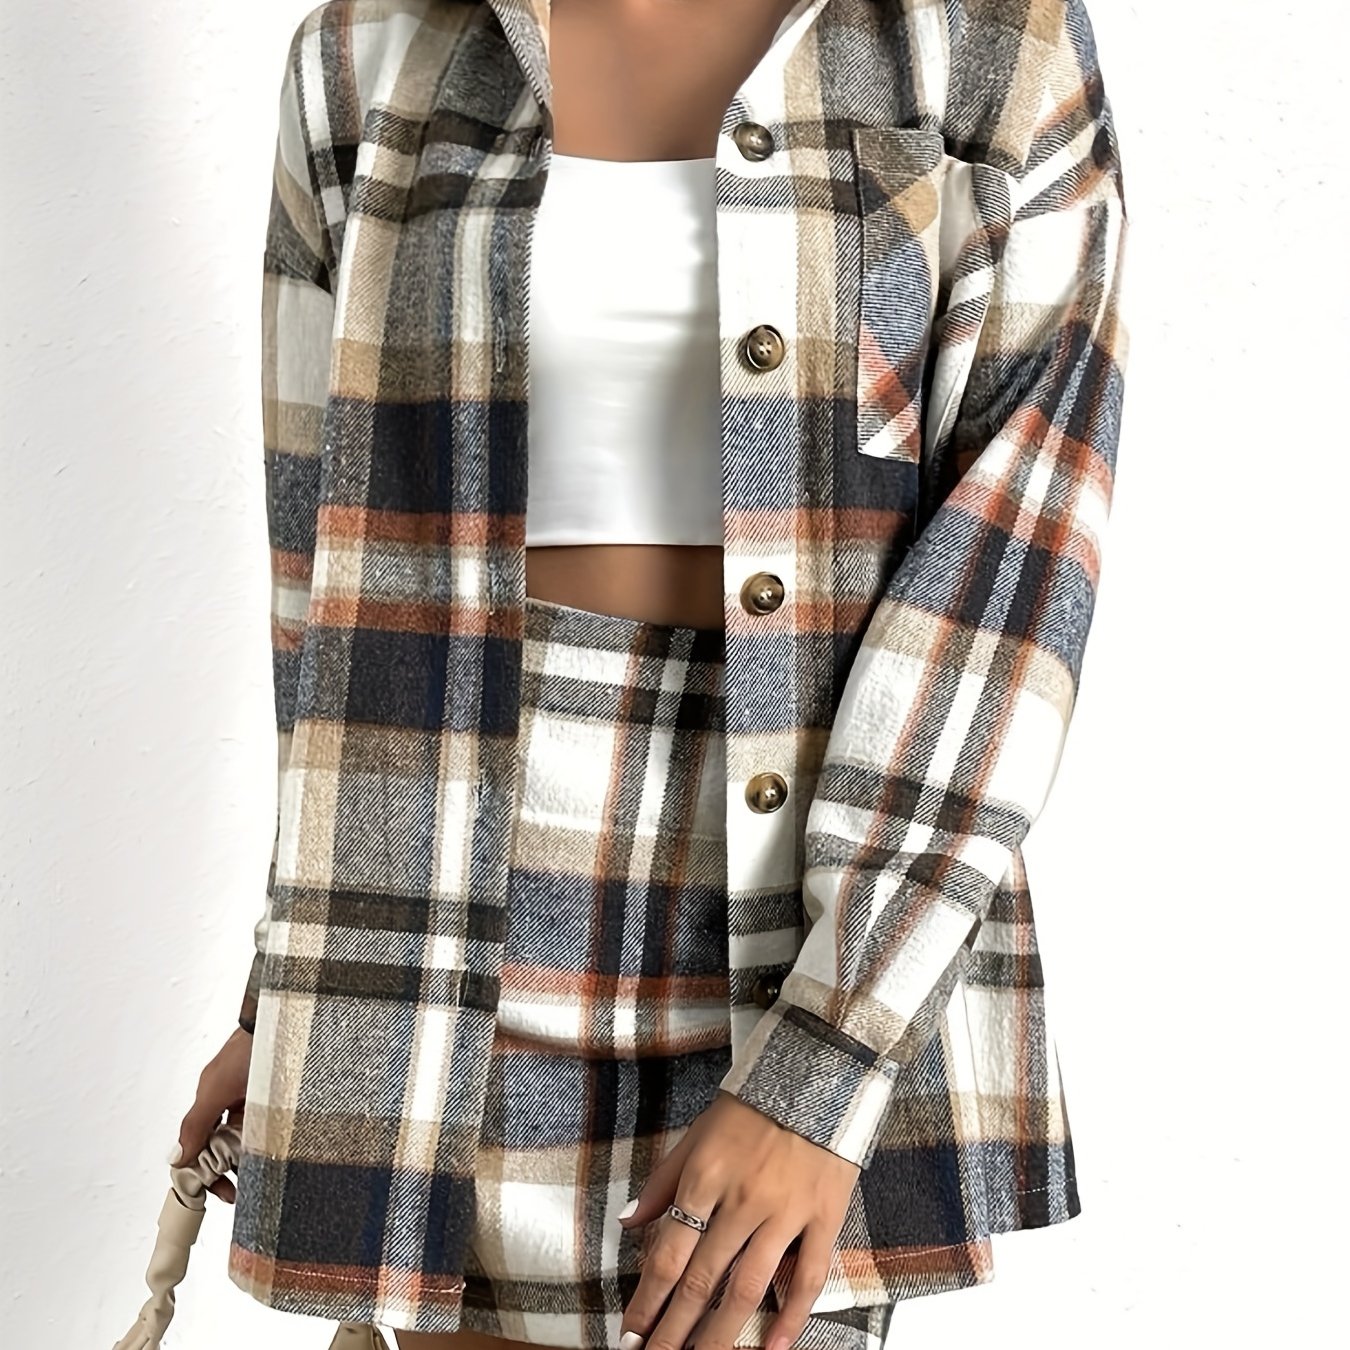 Antmvs Plaid Print Casual Two-piece Set, Button Front Long Sleeve Shirt & Bag Hip Skirts Outfits, Women's Clothing